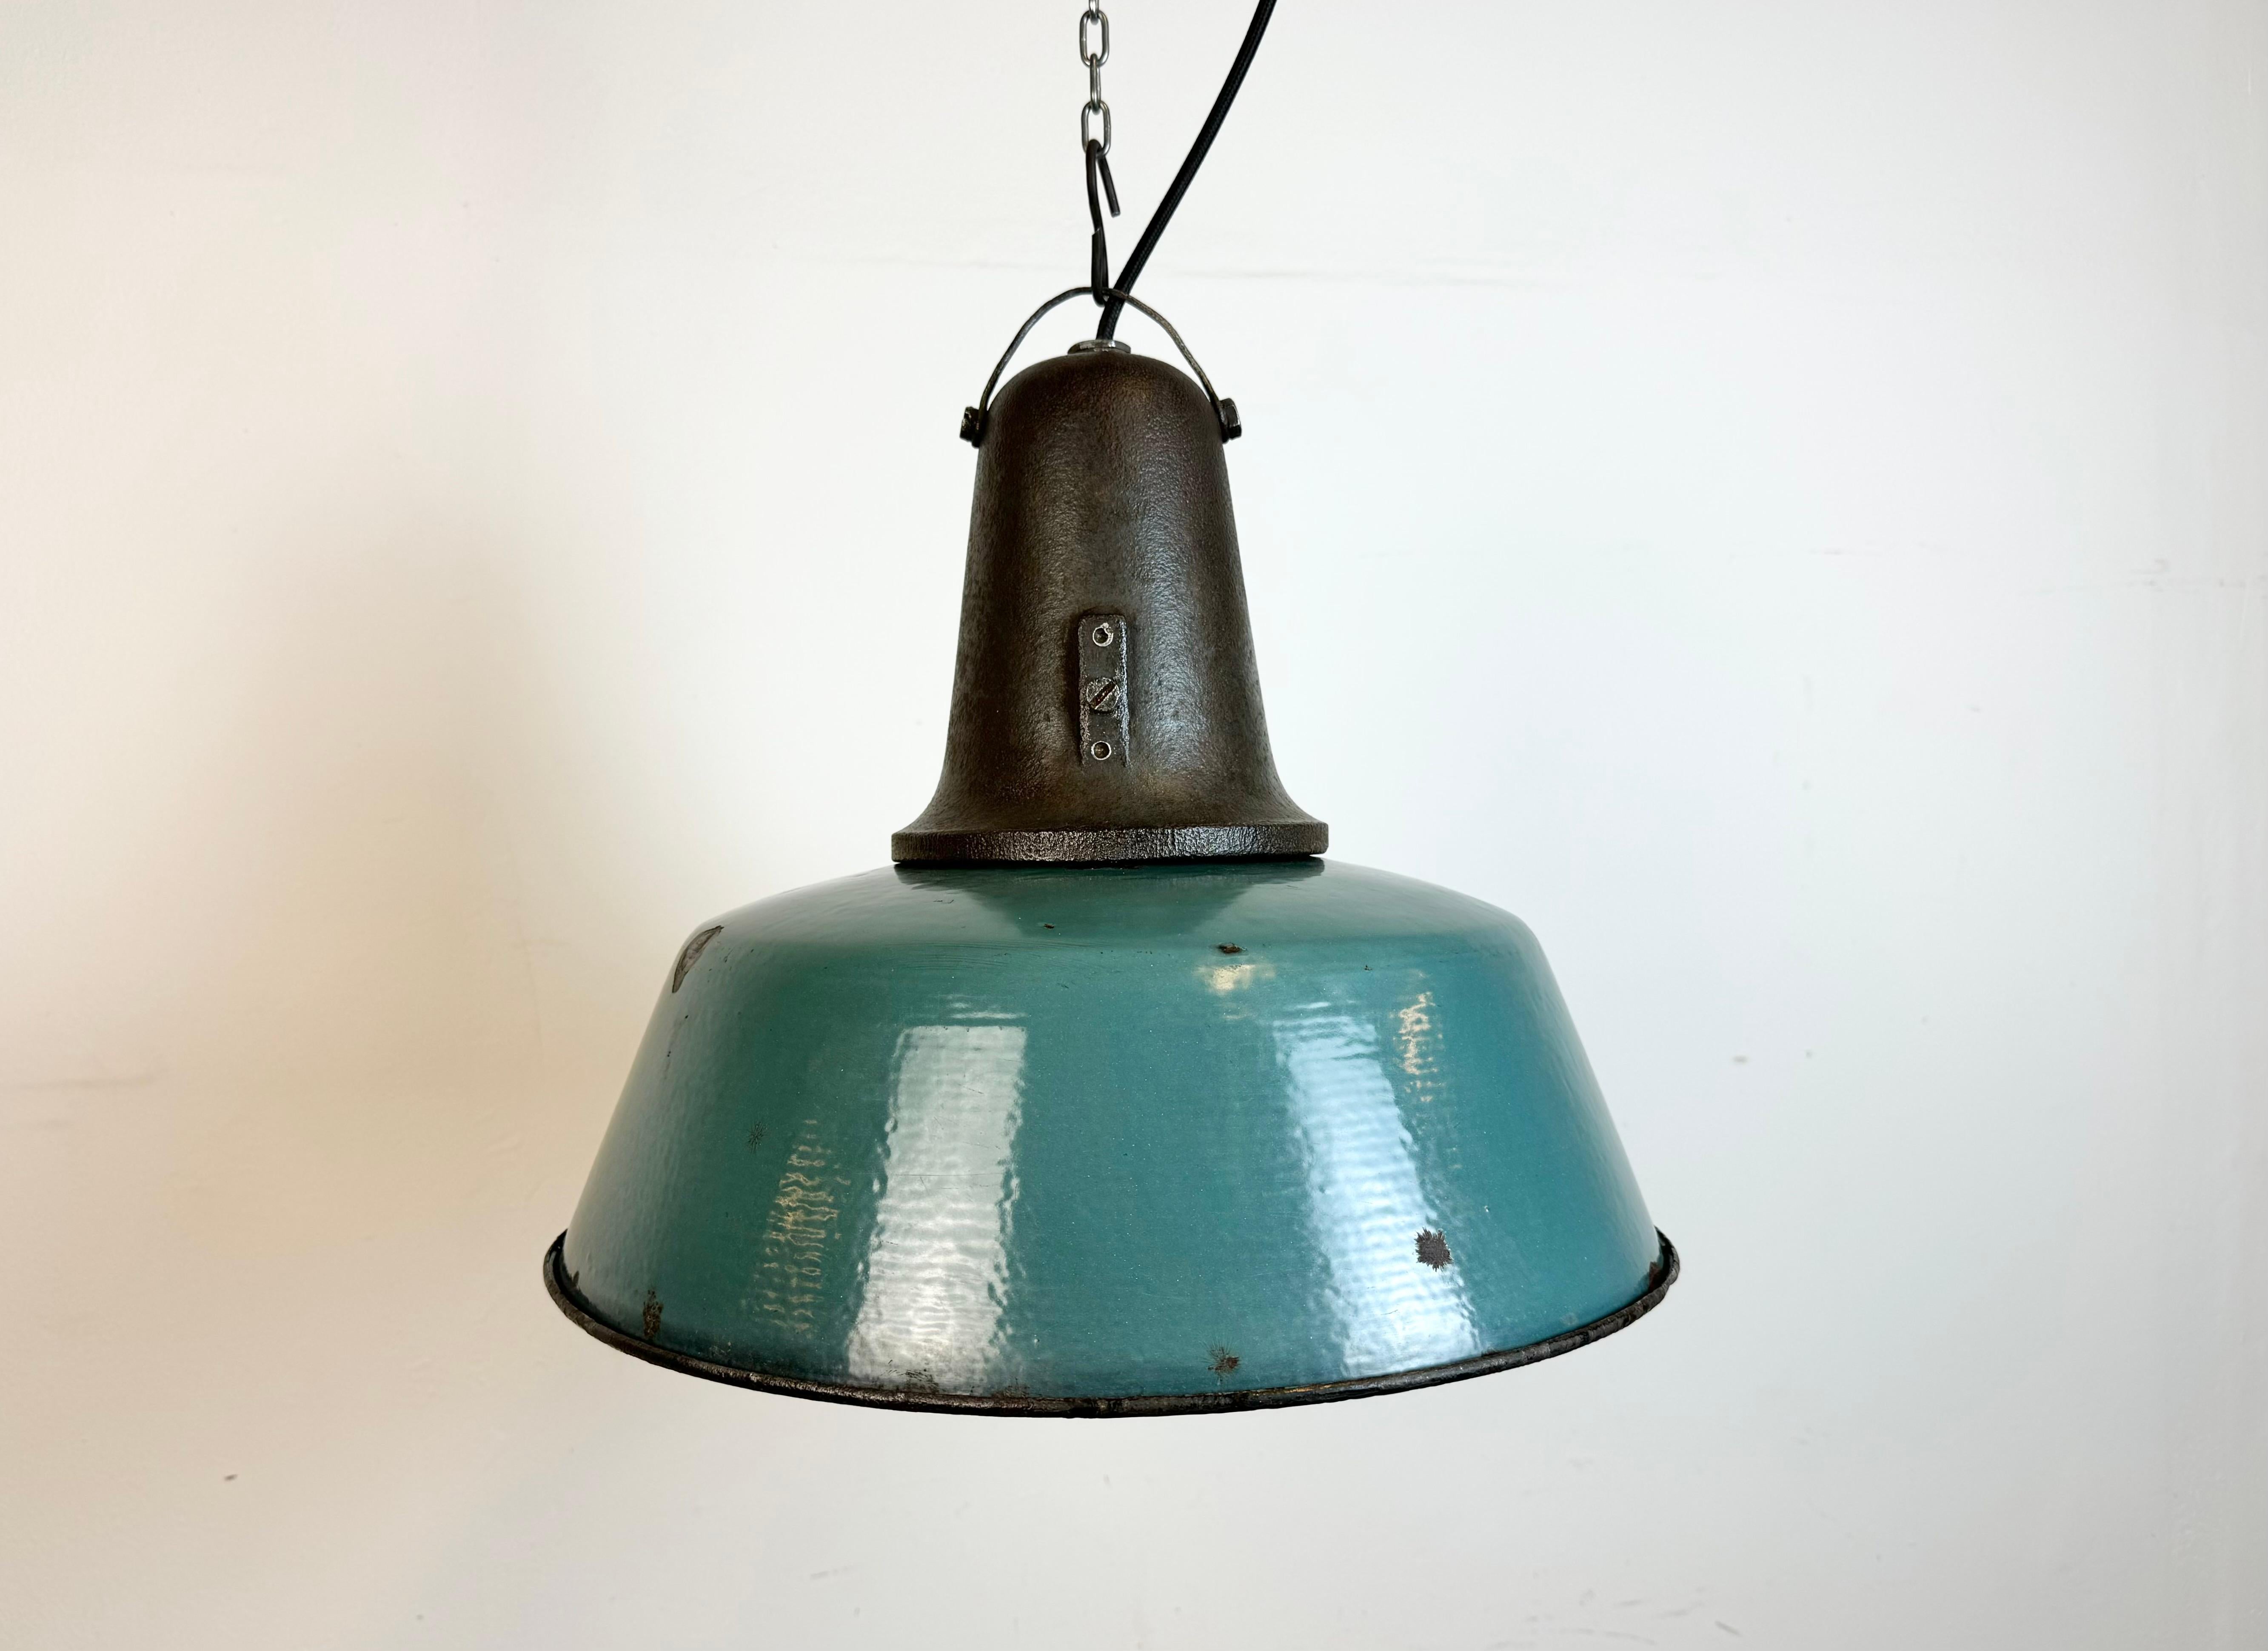 Industrial petrol enamel pendant light made in Poland during the 1960s. White enamel inside the shade. Cast iron top. The porcelain socket requires standard E 27/ E26 light bulbs. New wire. Fully functional. The weight of the lamp is 4,5 kg.